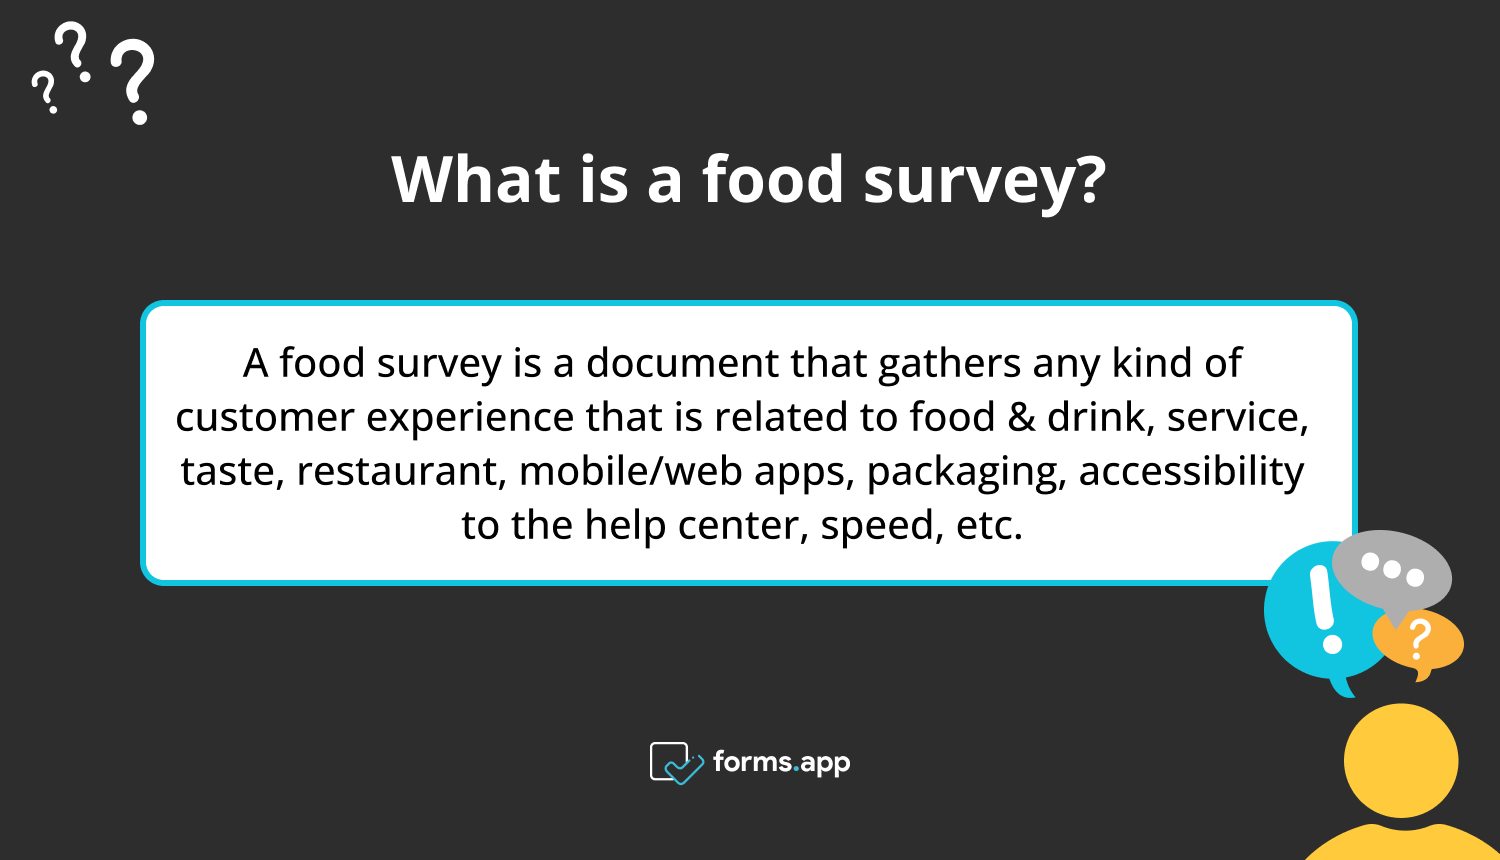 The definition of a food survey